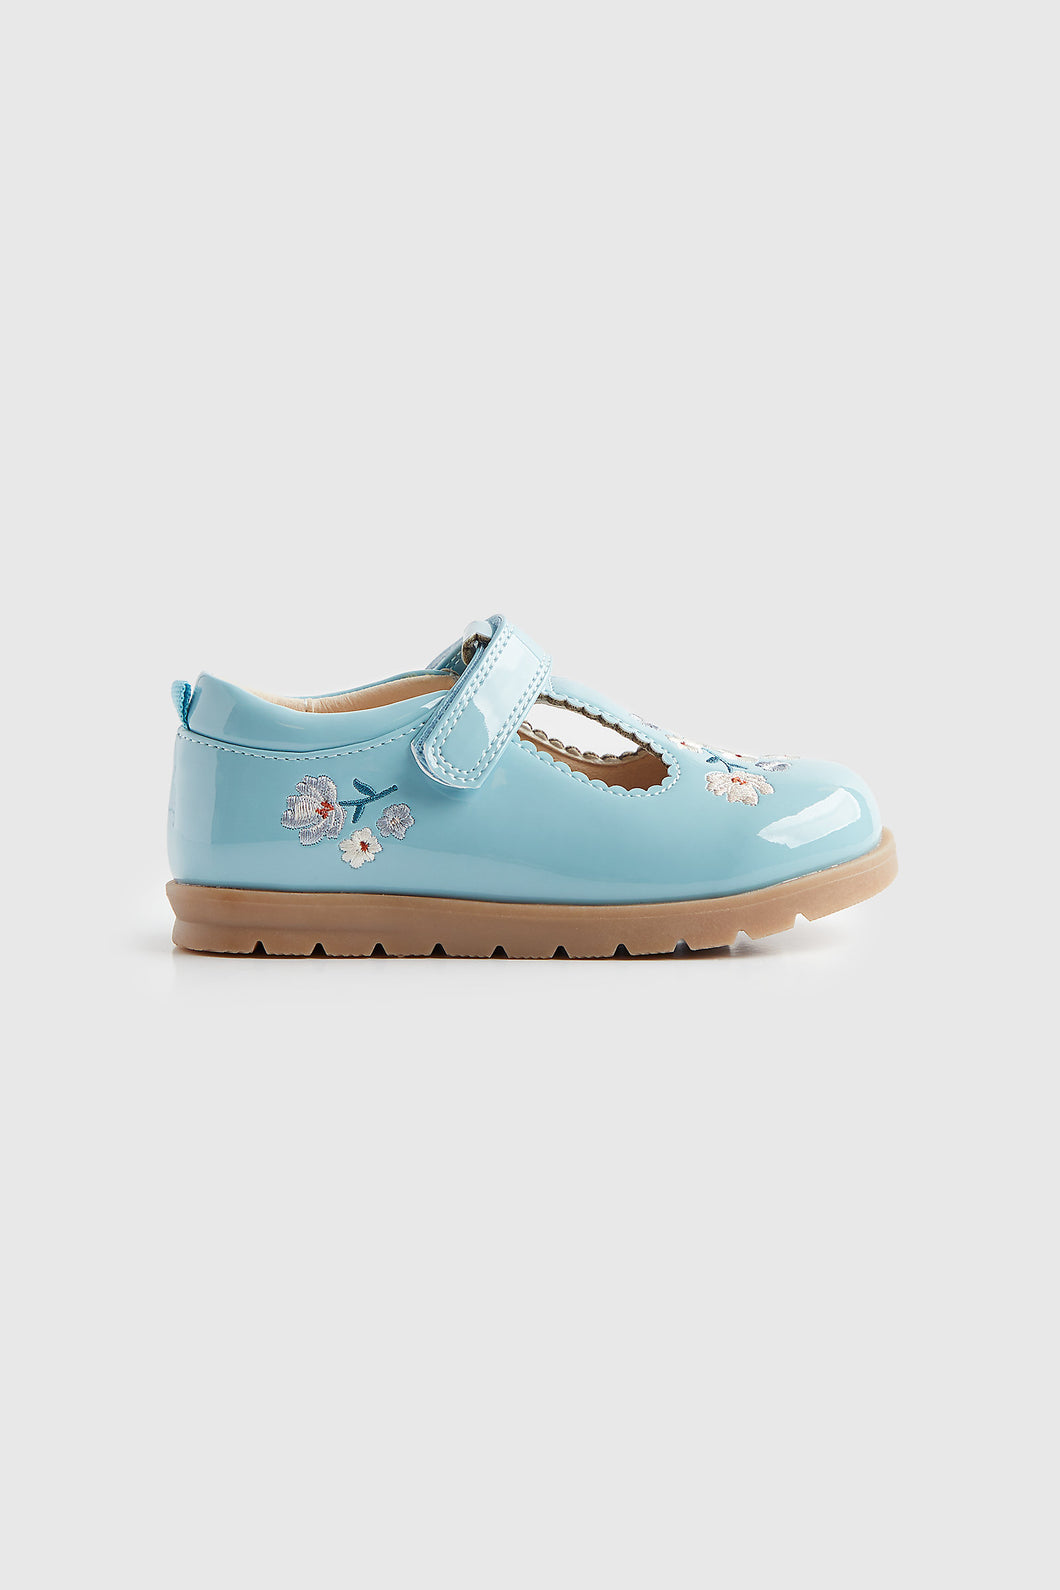 Mothercare Teal Patent Shoes